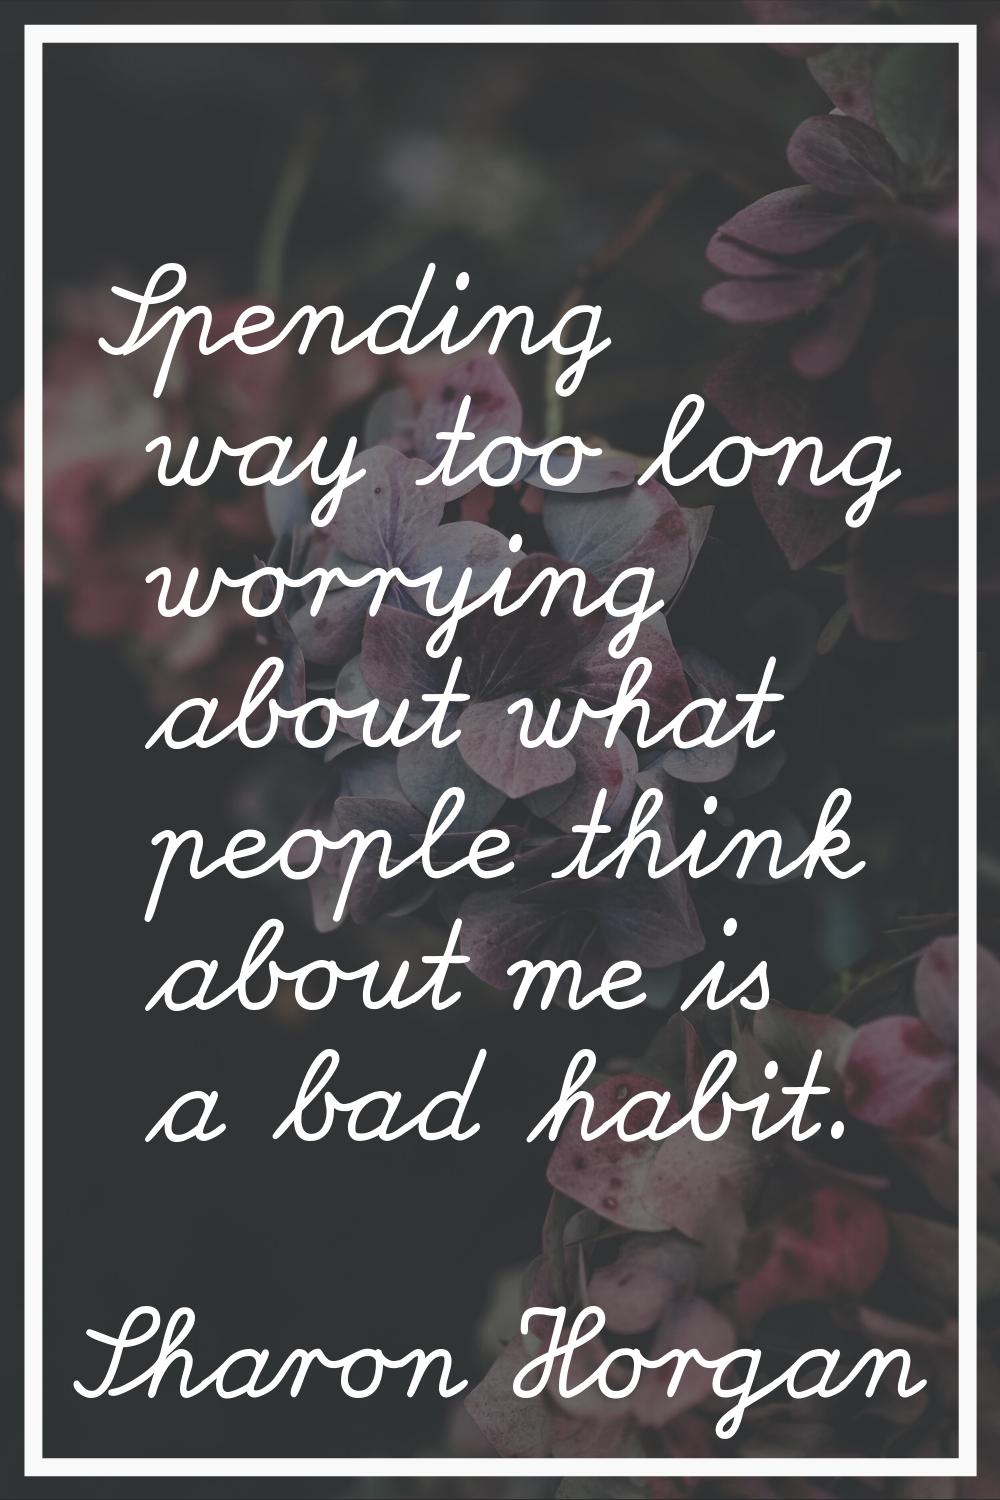 Spending way too long worrying about what people think about me is a bad habit.